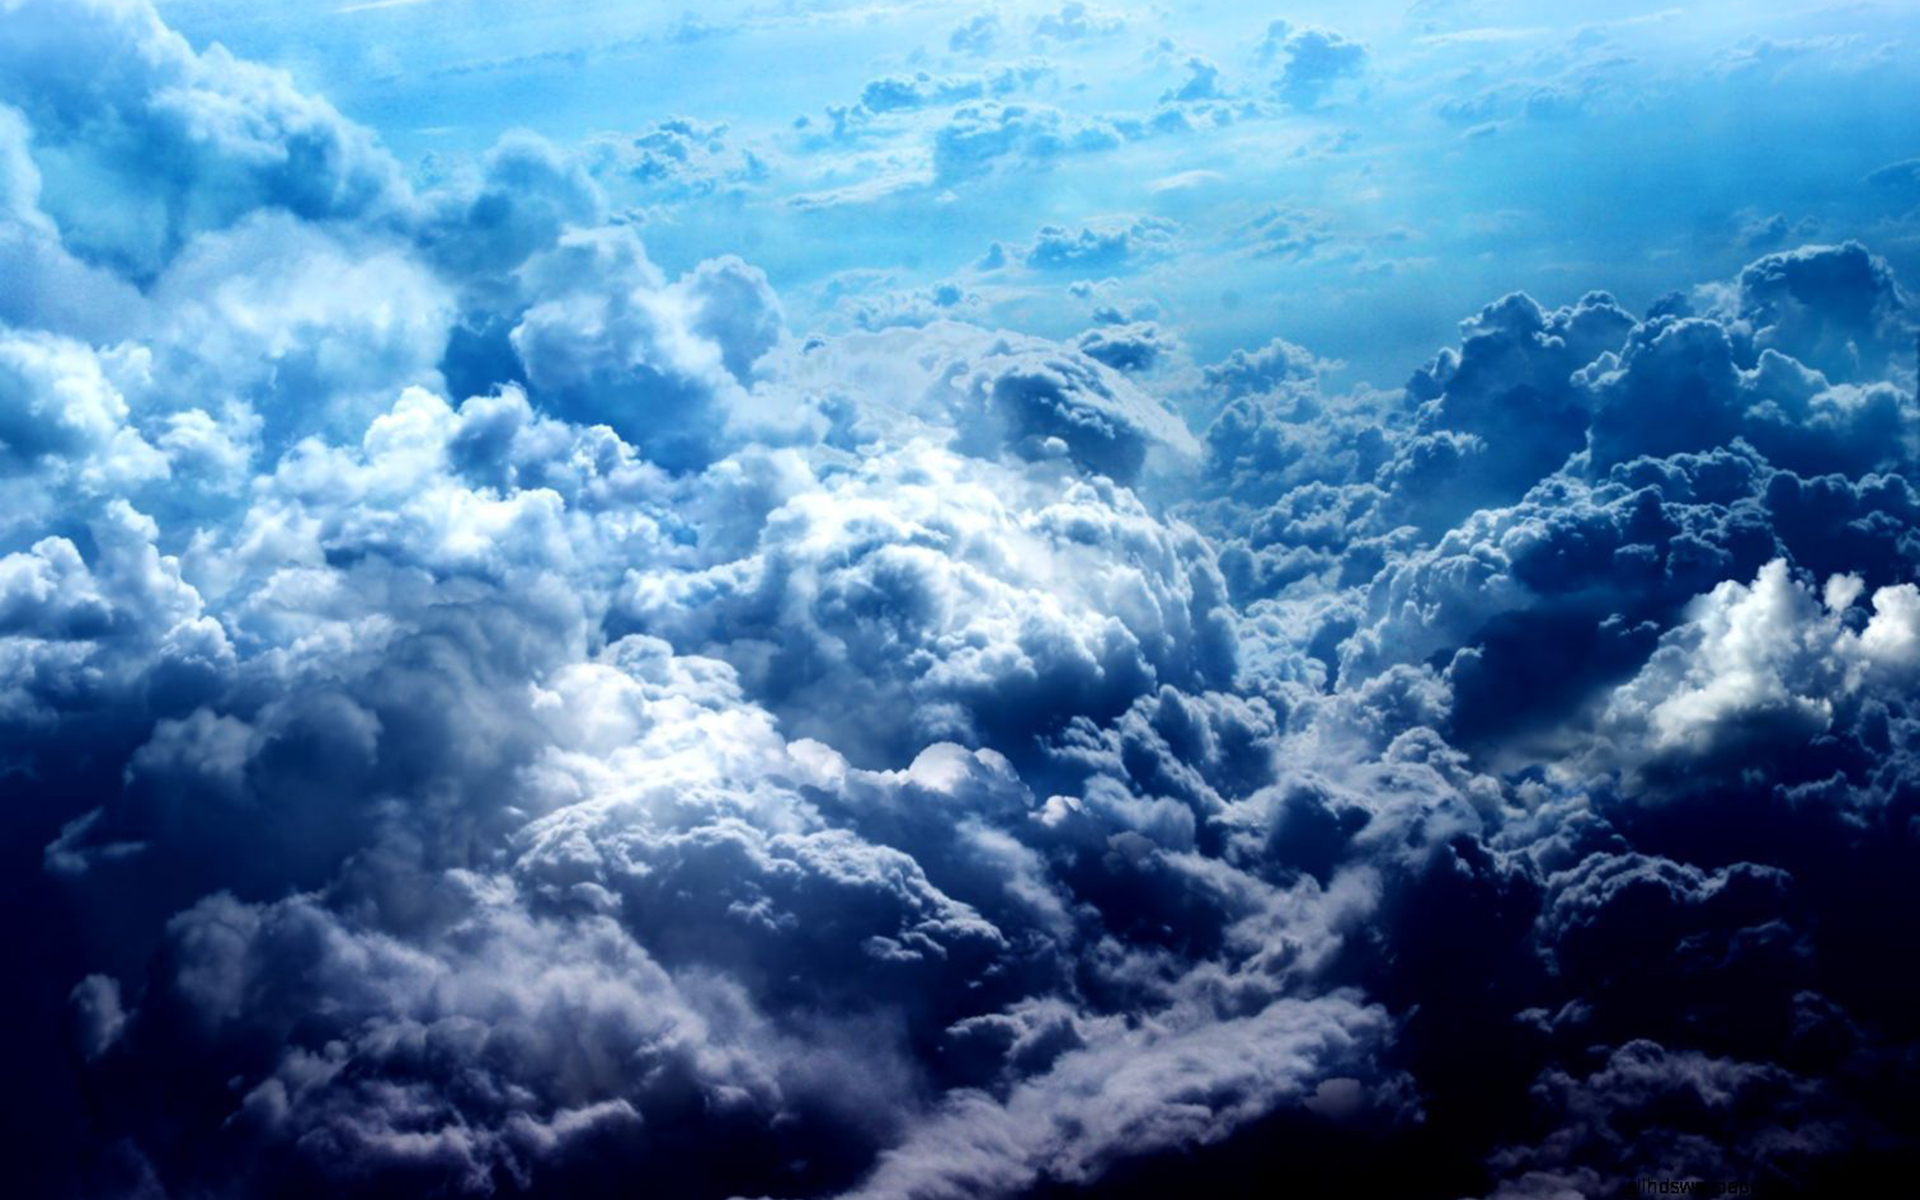 Clouds Aesthetic Wallpapers